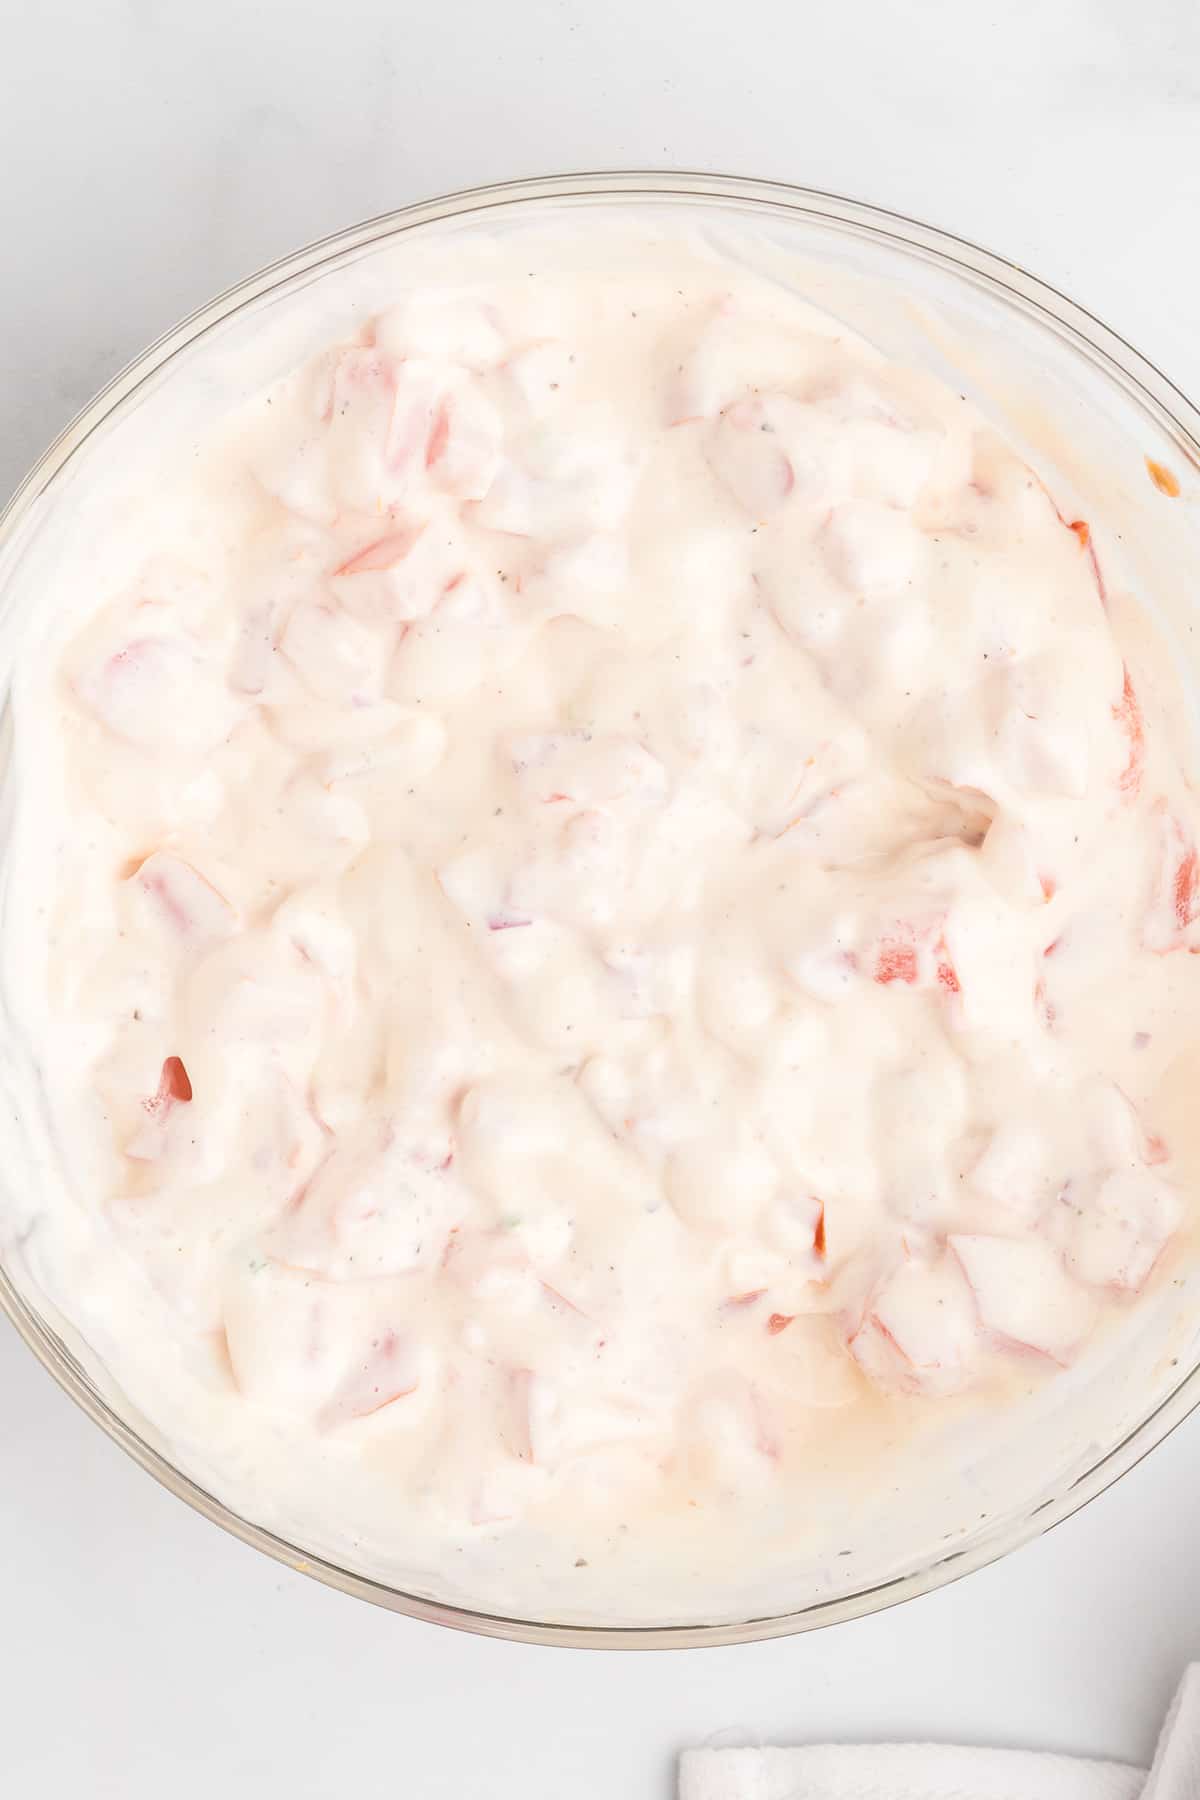 Diced tomatoes and mayonnaise mixed in a bowl.